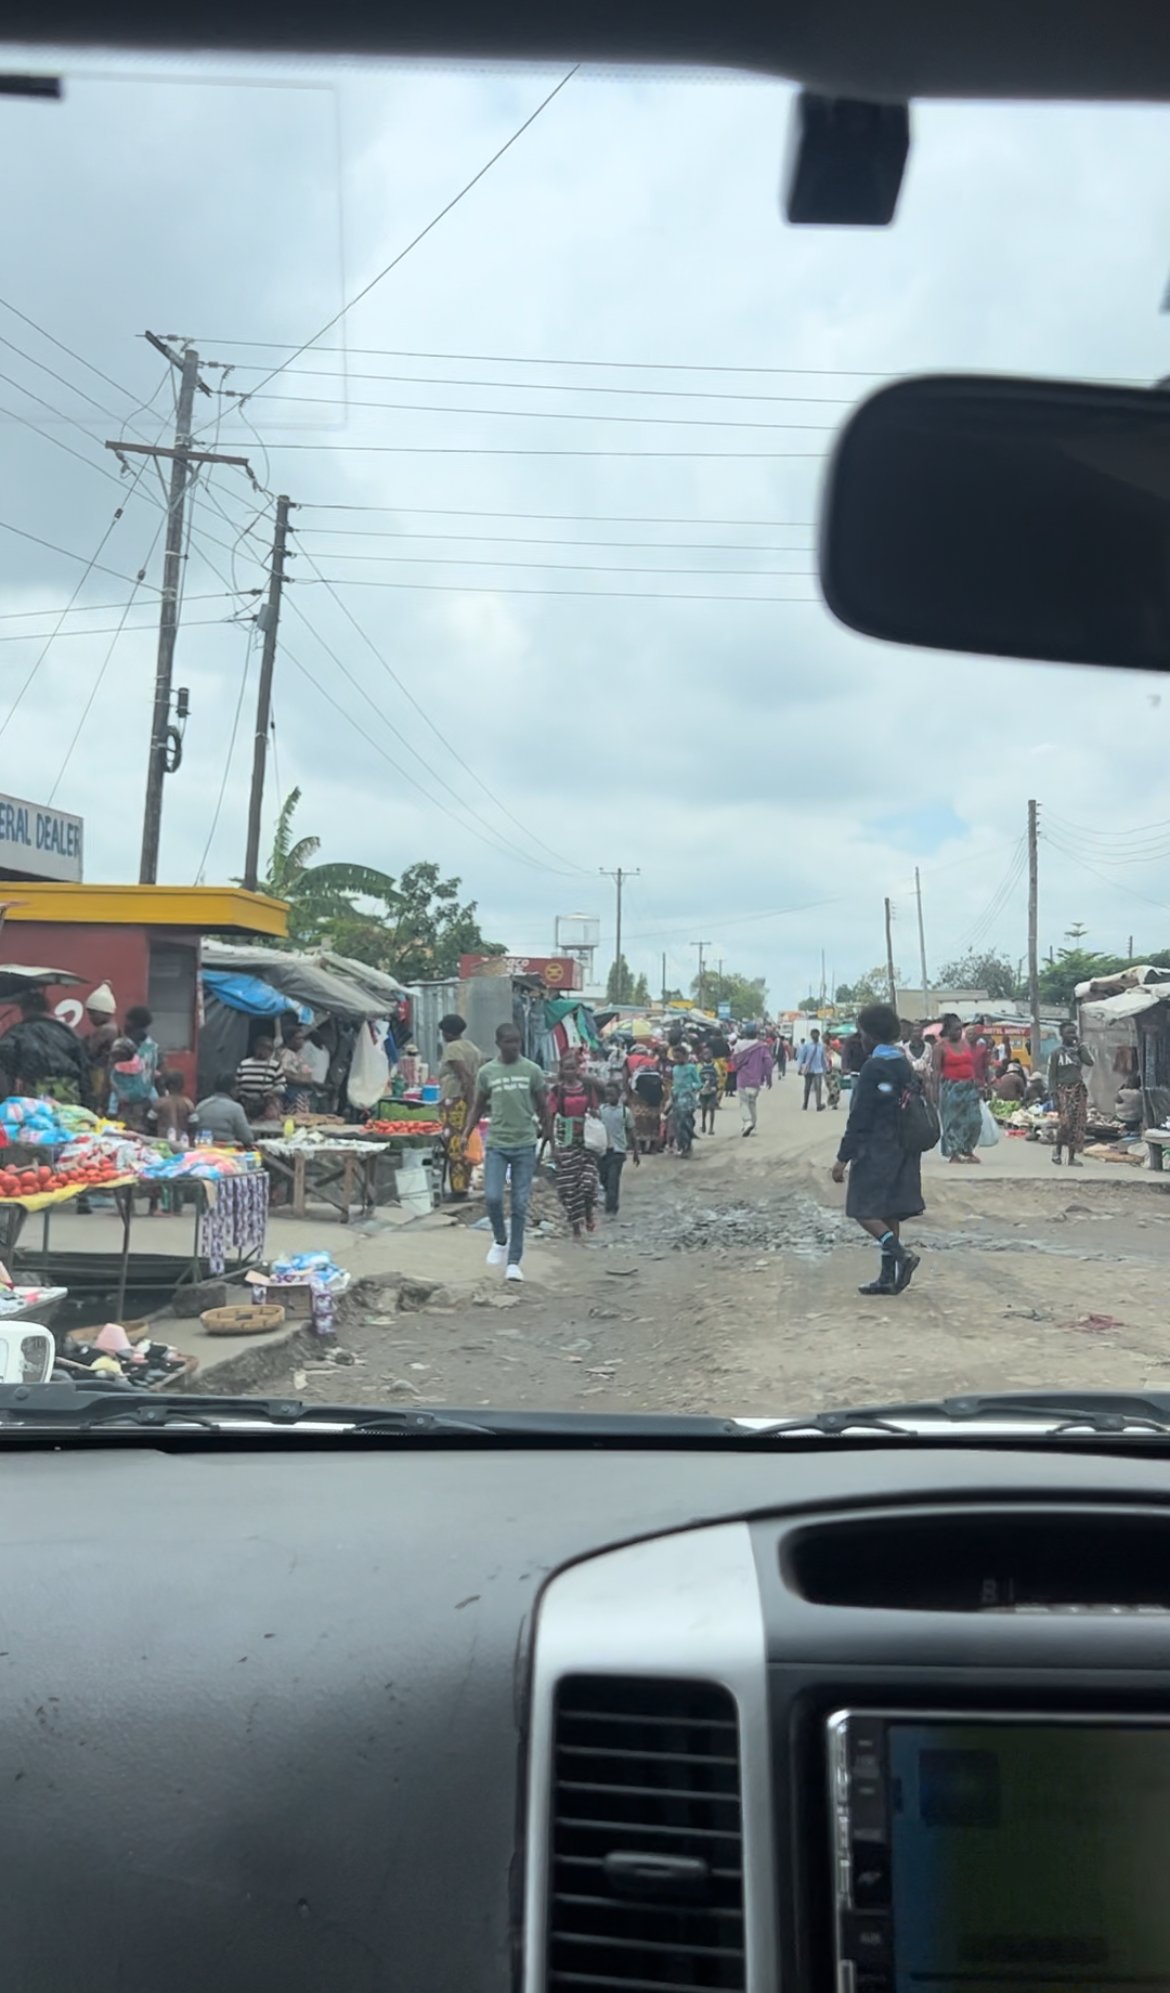 From the car: one of the markets we pass through on the way to school